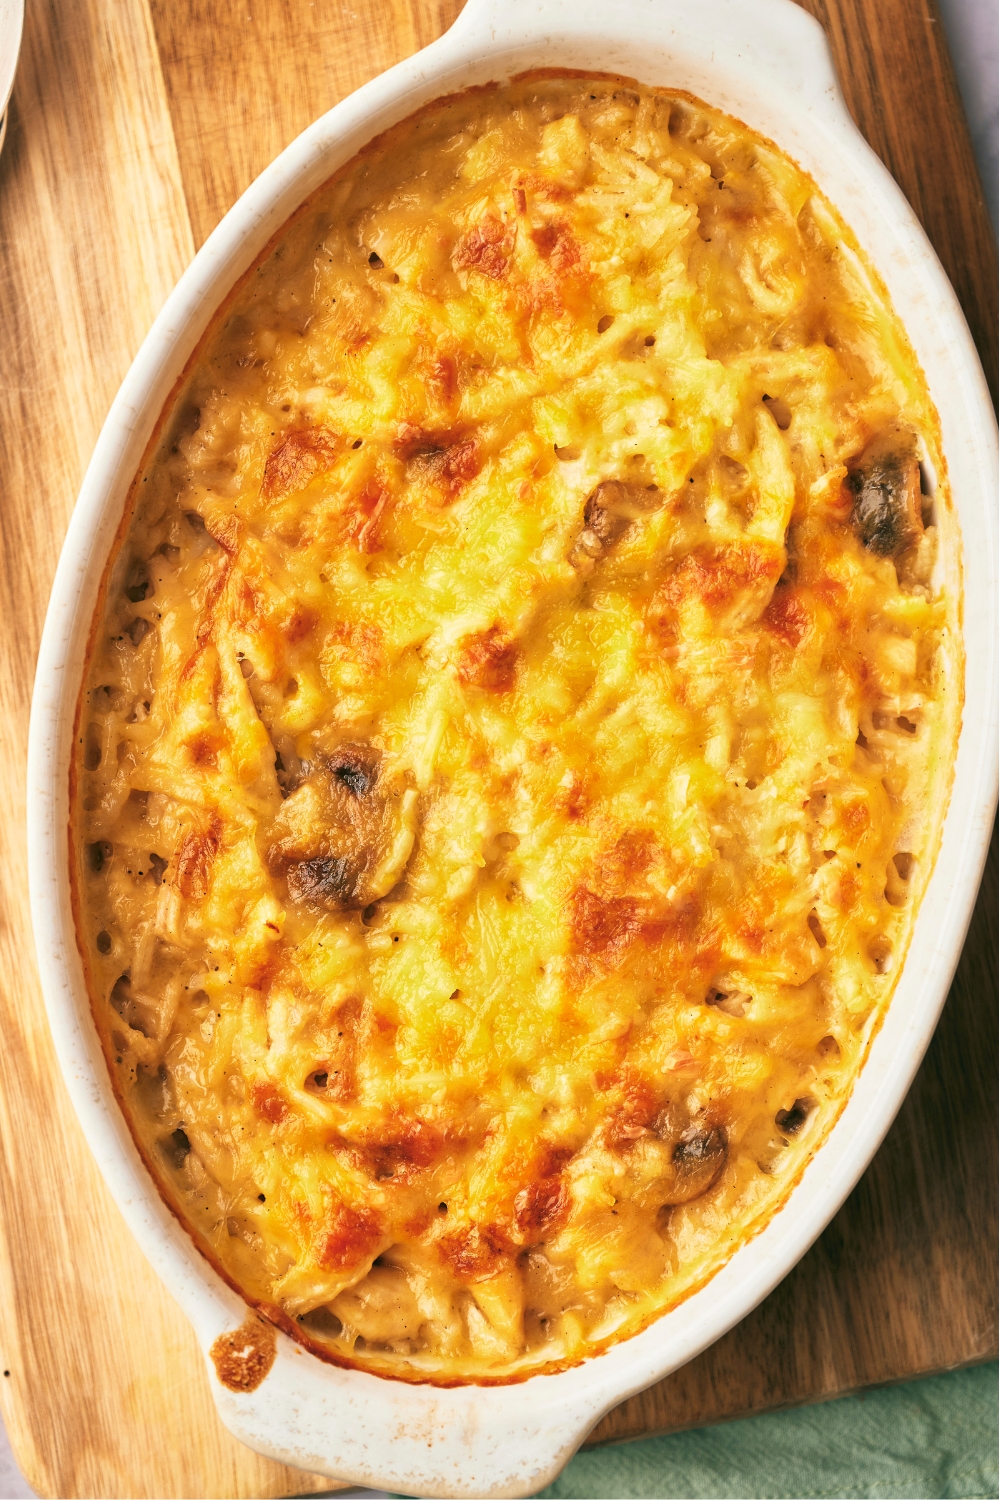 An overhead view of a casserole dish with baked cheesy chicken and rice casserole in it.